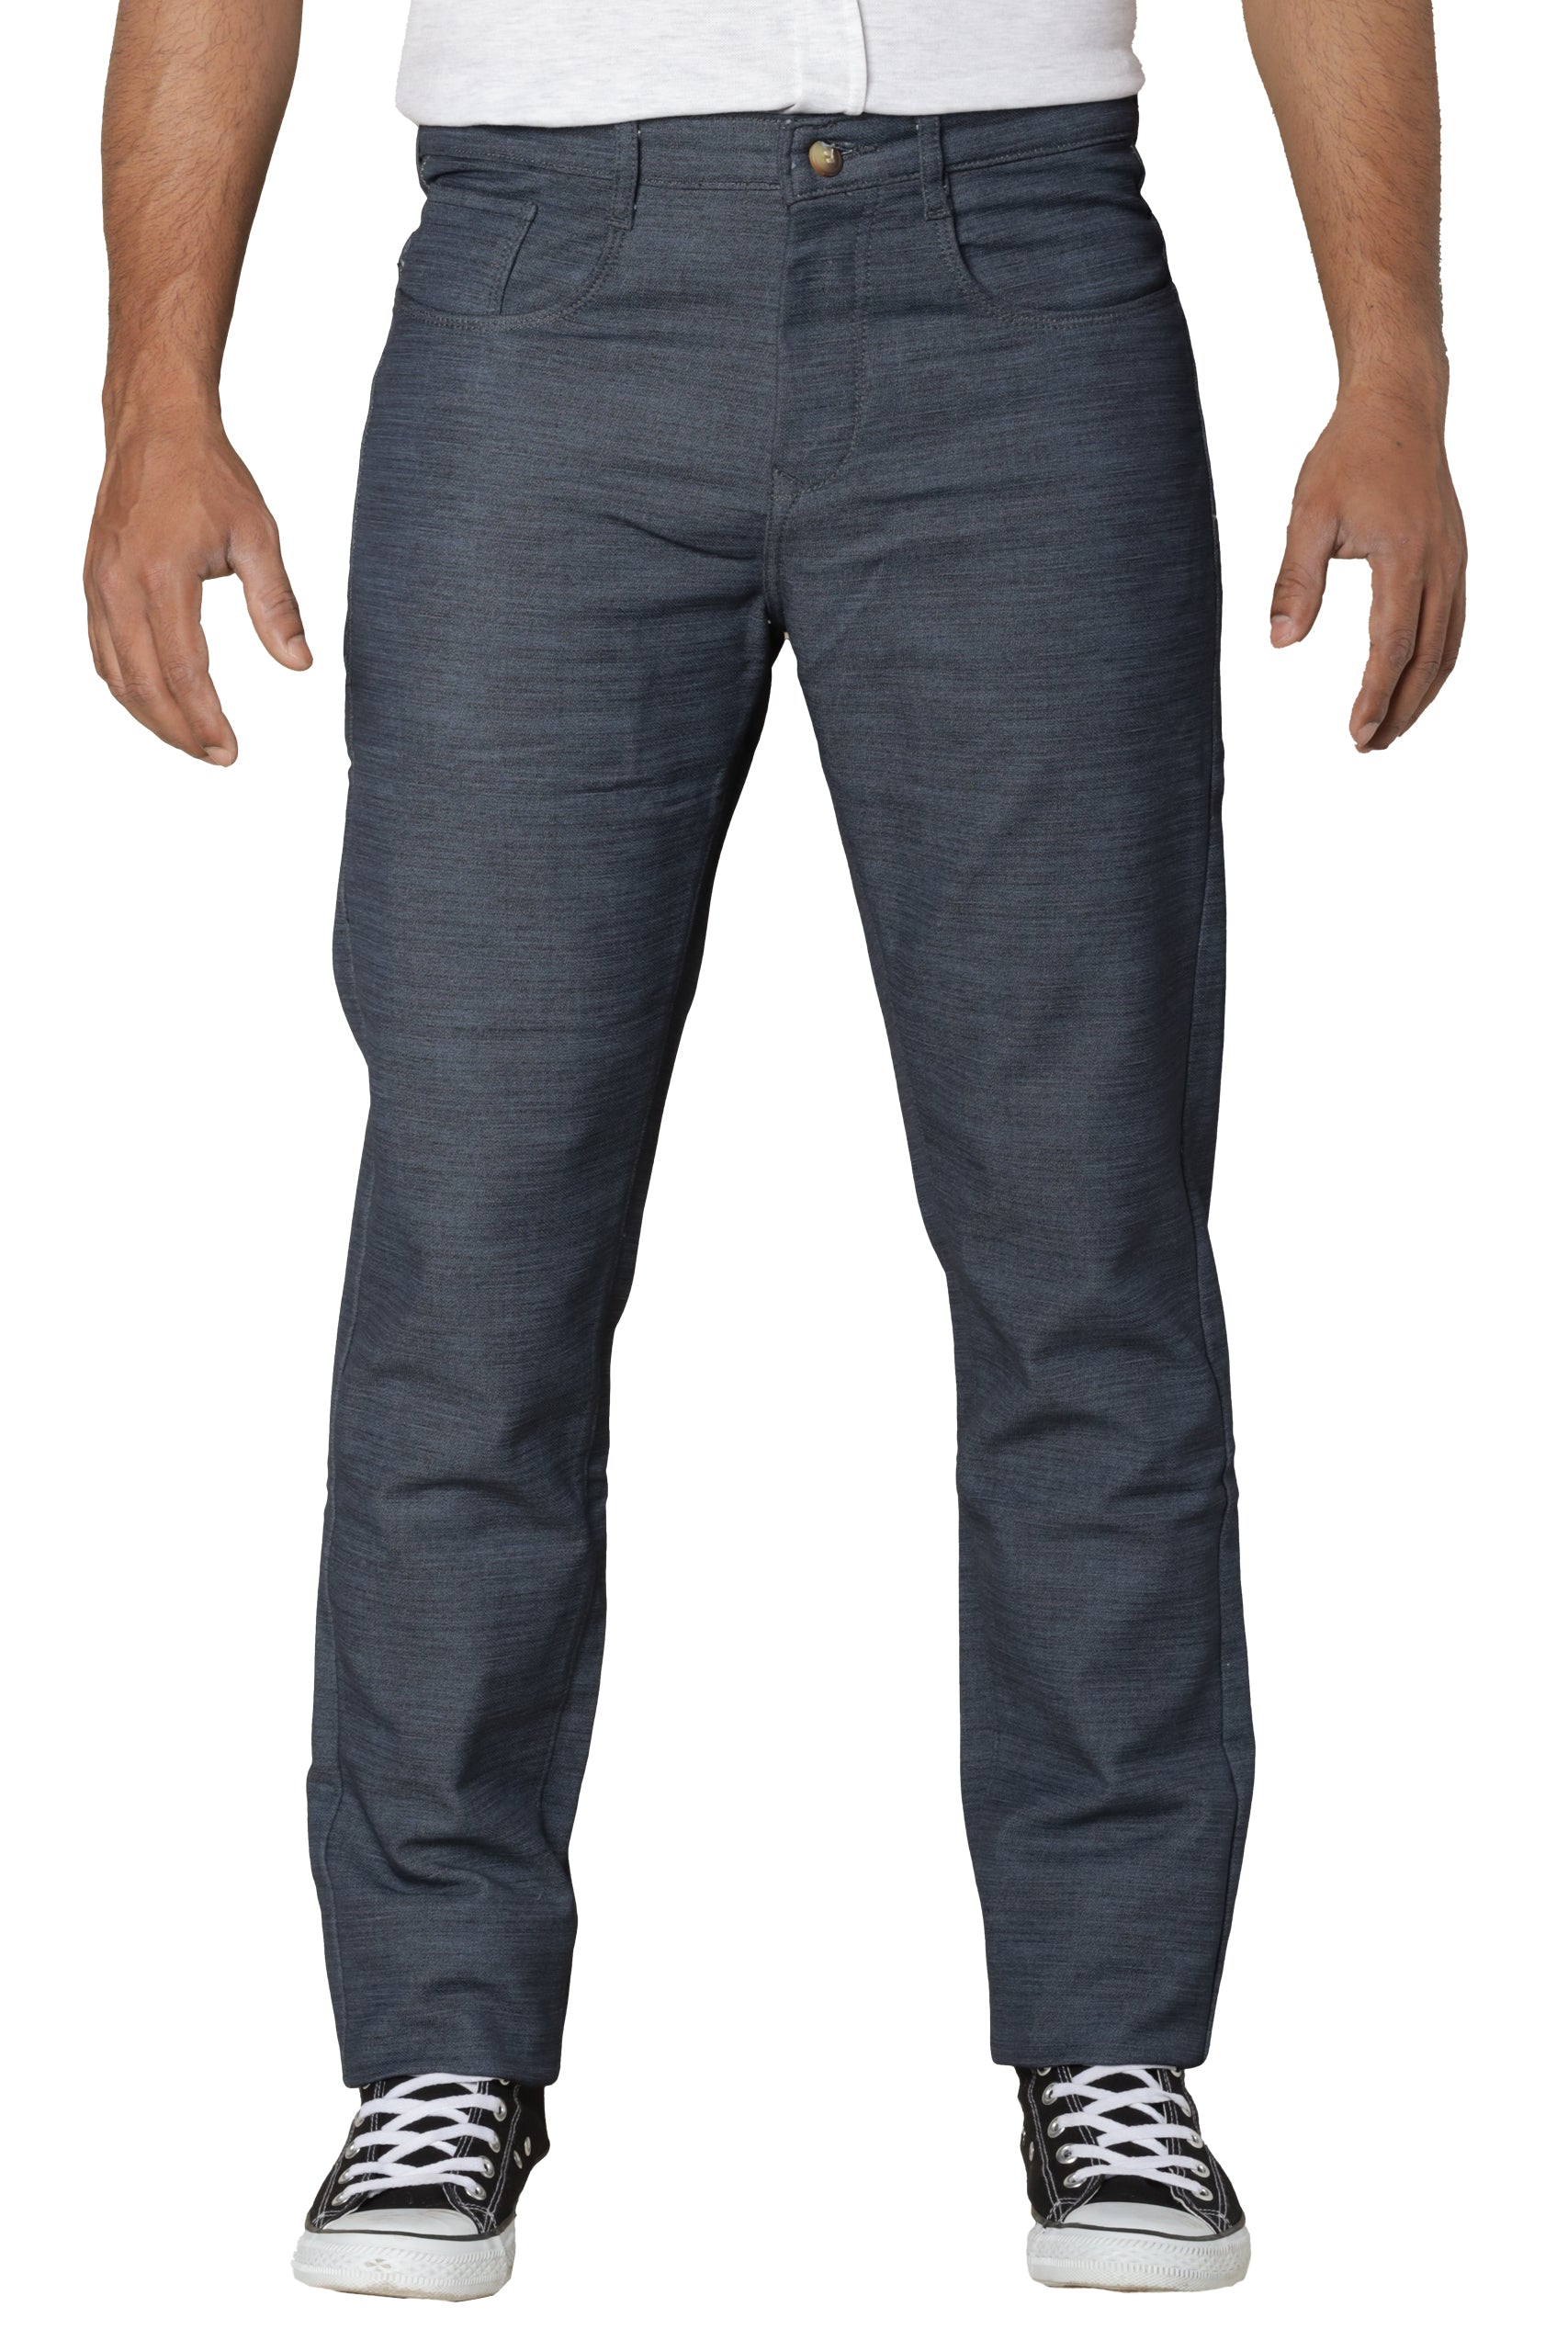 Front View of Space Blue Coloured Printed Denim Jeans at Muffynn Store